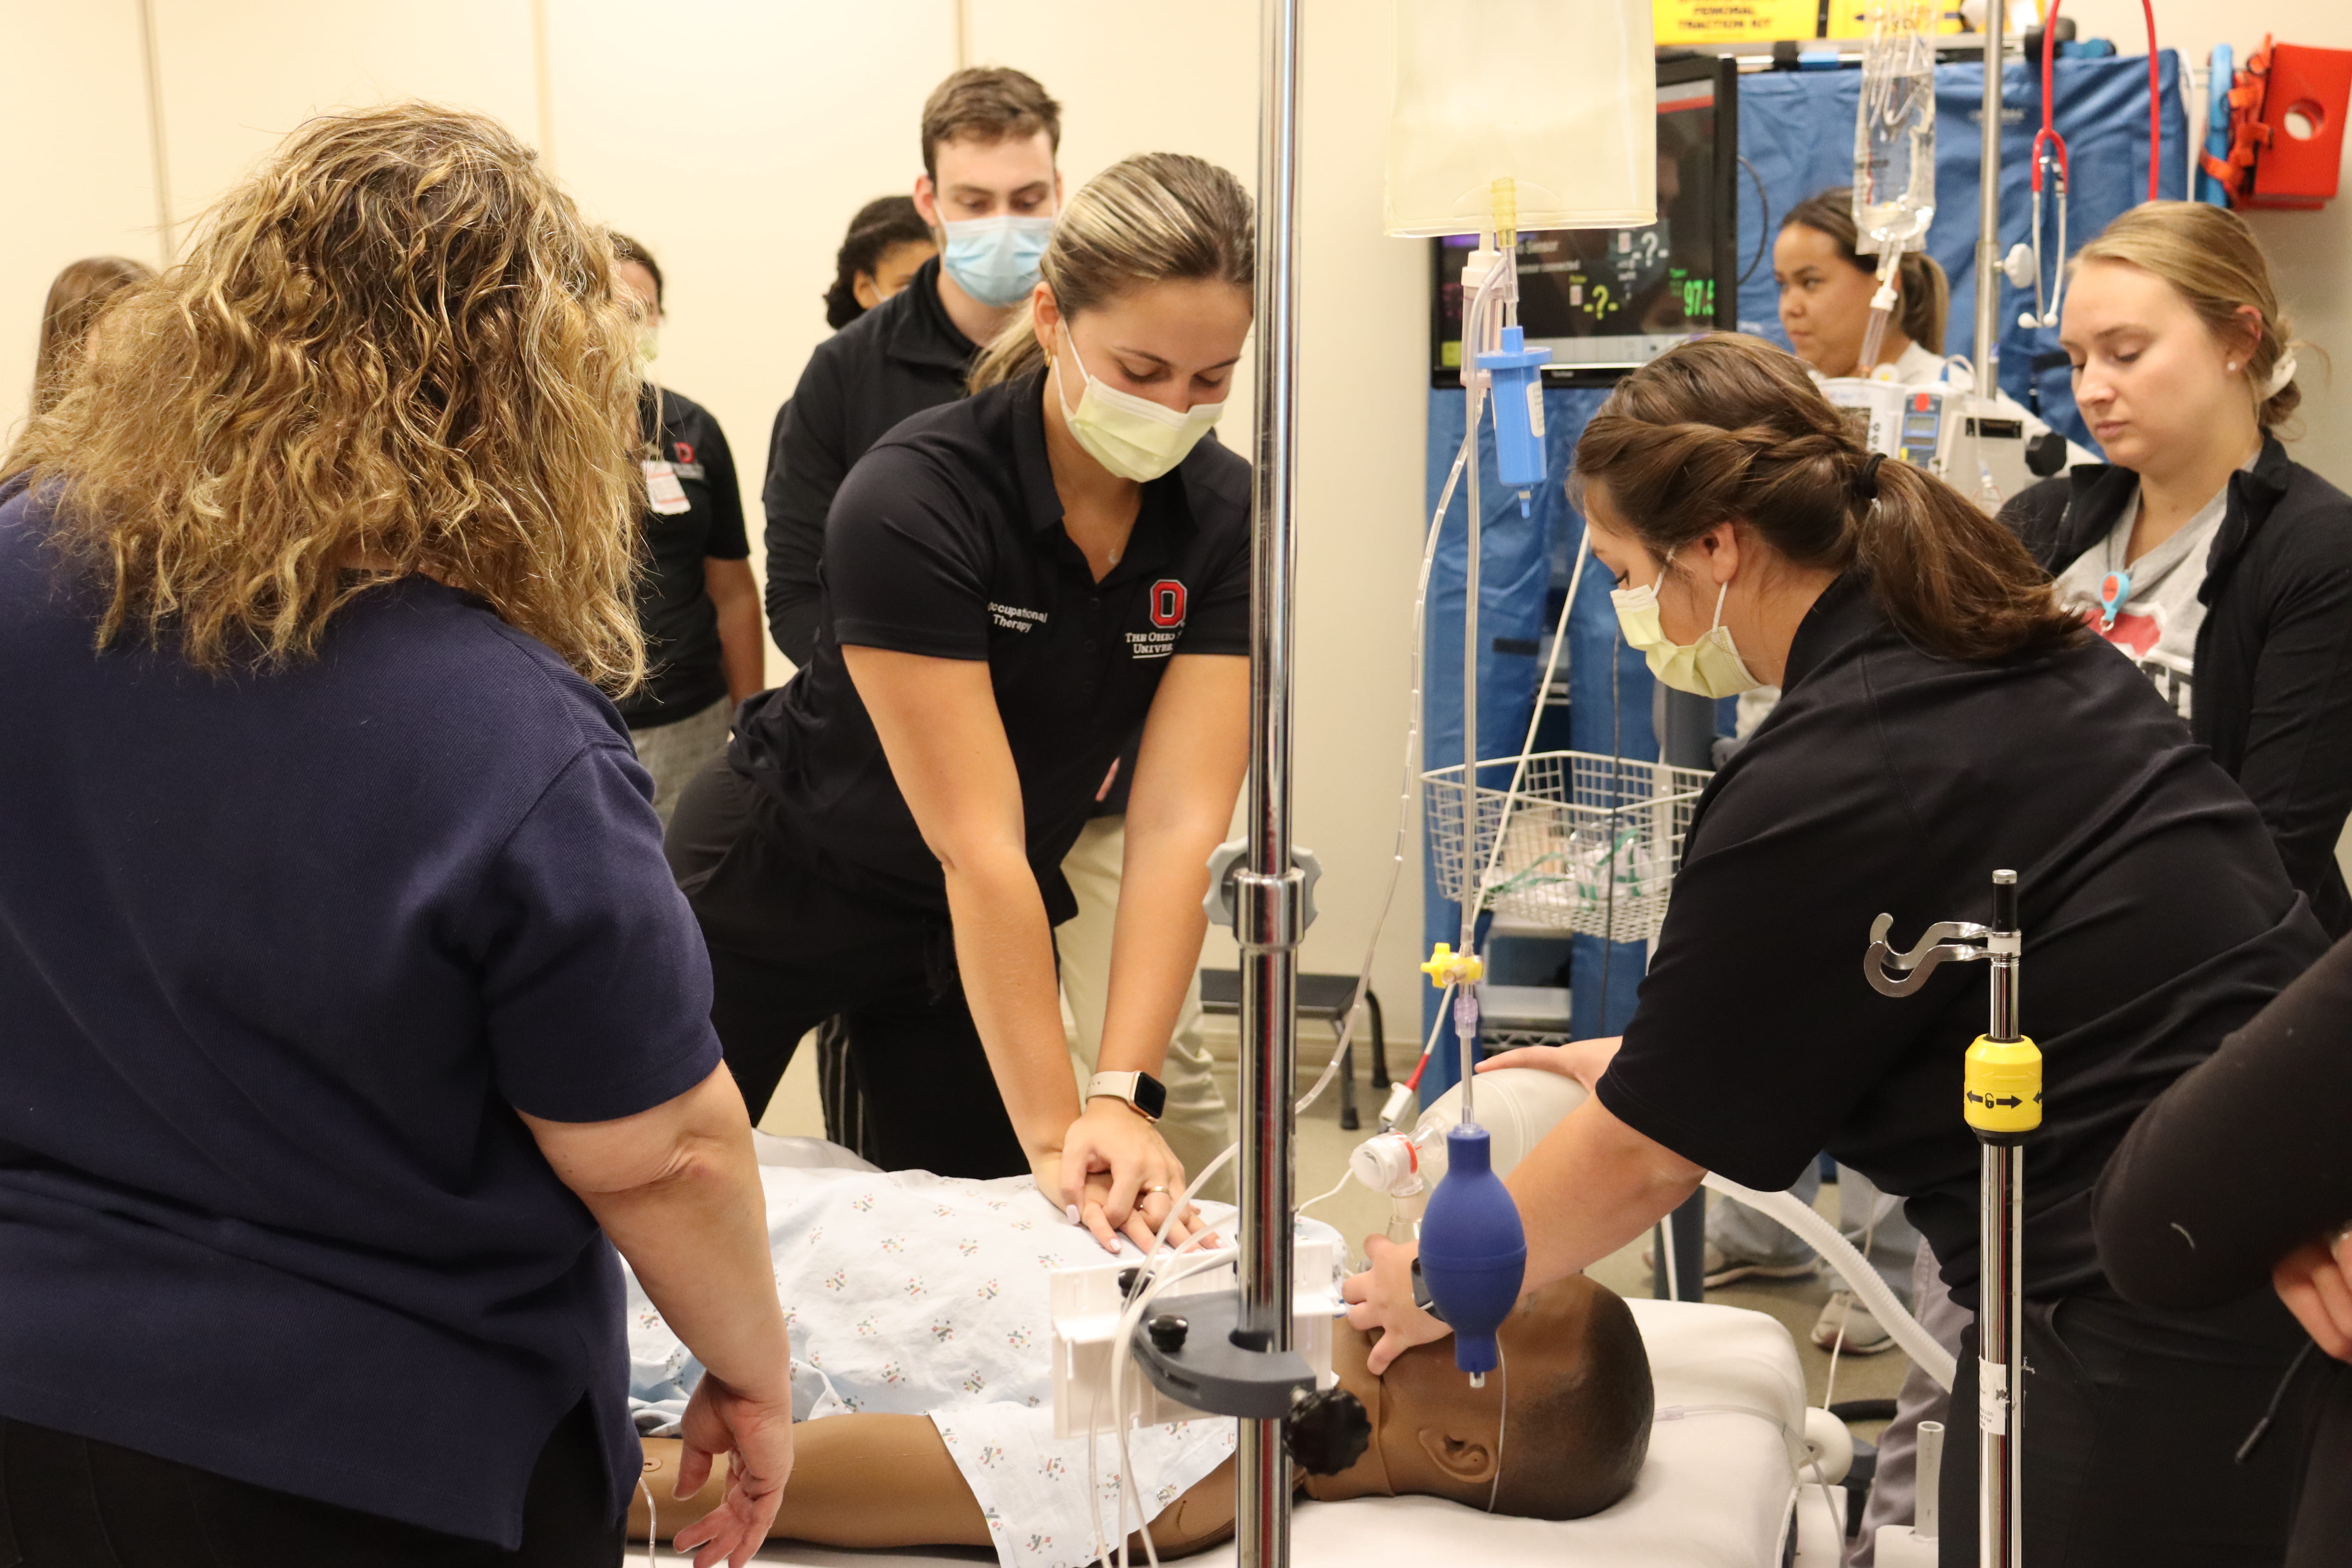 Multiple students watching 2 students and an instructor perform CPR on a patient simulator